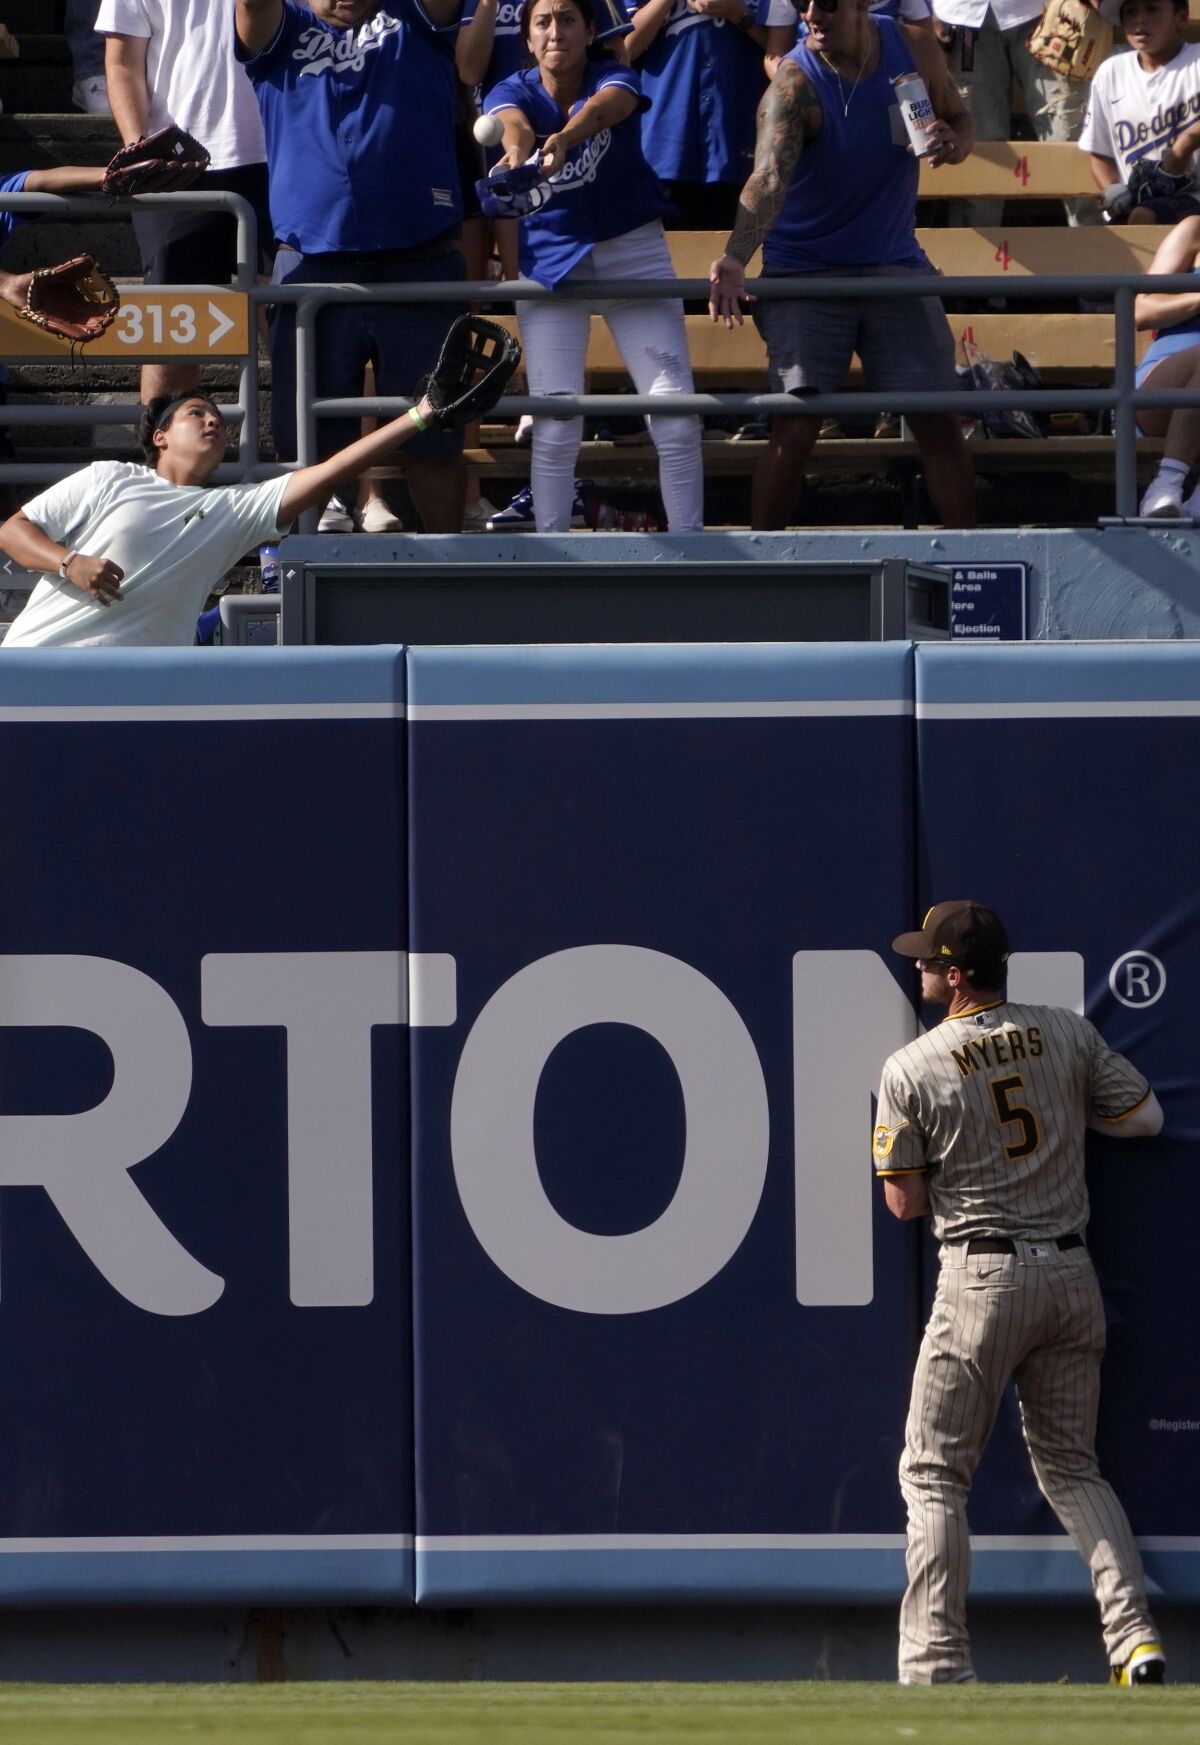 Padres center fielder Wil Myers watches as a ball hit by the Dodgers' Cody Bellinger clears the wall for a solo home run